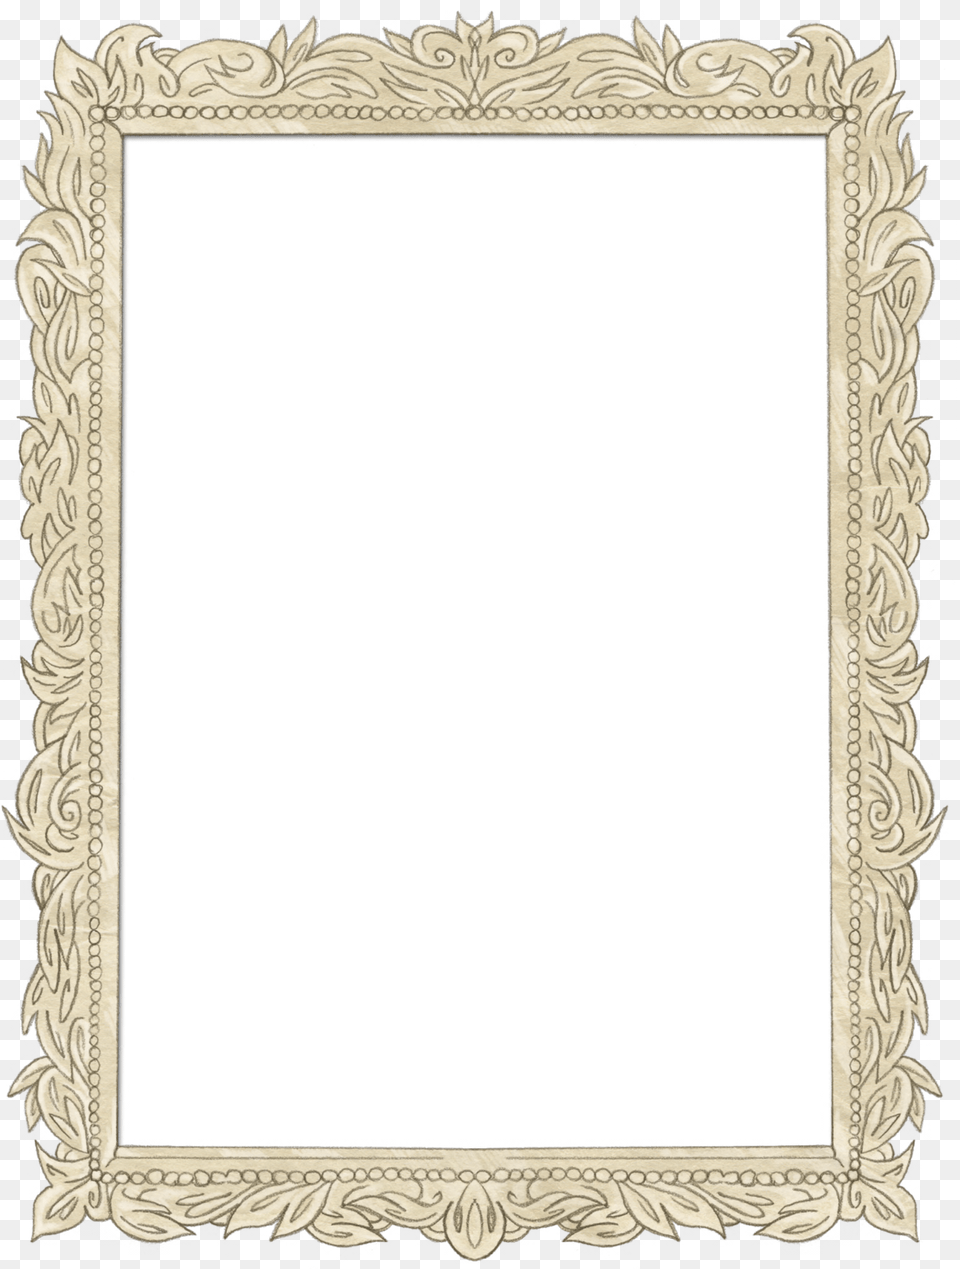 Snappygoatcom Public Domain Images Snappygoatcom Picture Frame, Blackboard, Mirror Free Png Download